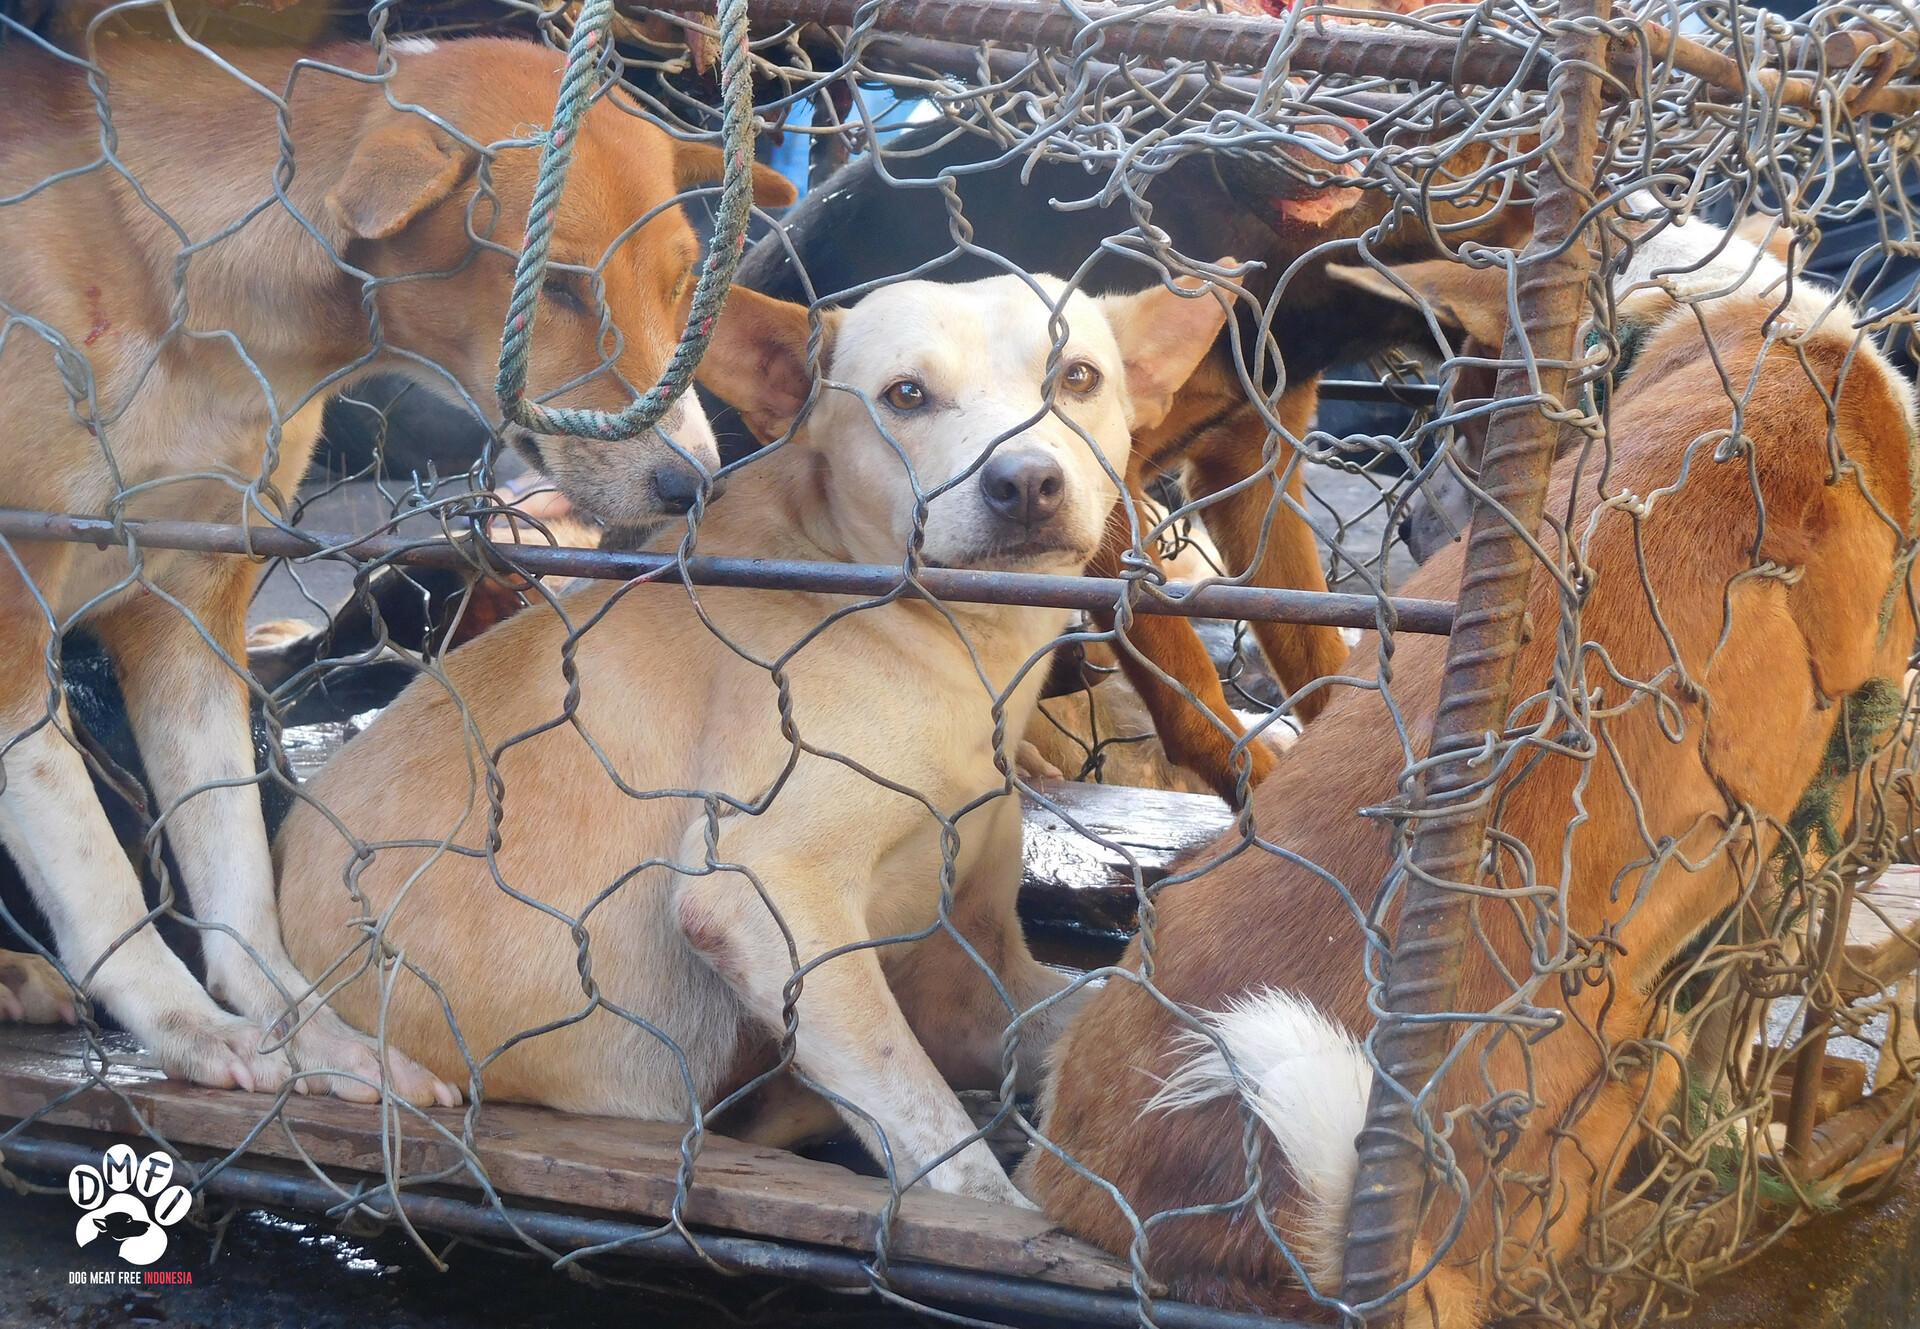 Tackling the cruel dog and cat meat trade in Asia - FOUR PAWS International  - Animal Welfare Organisation